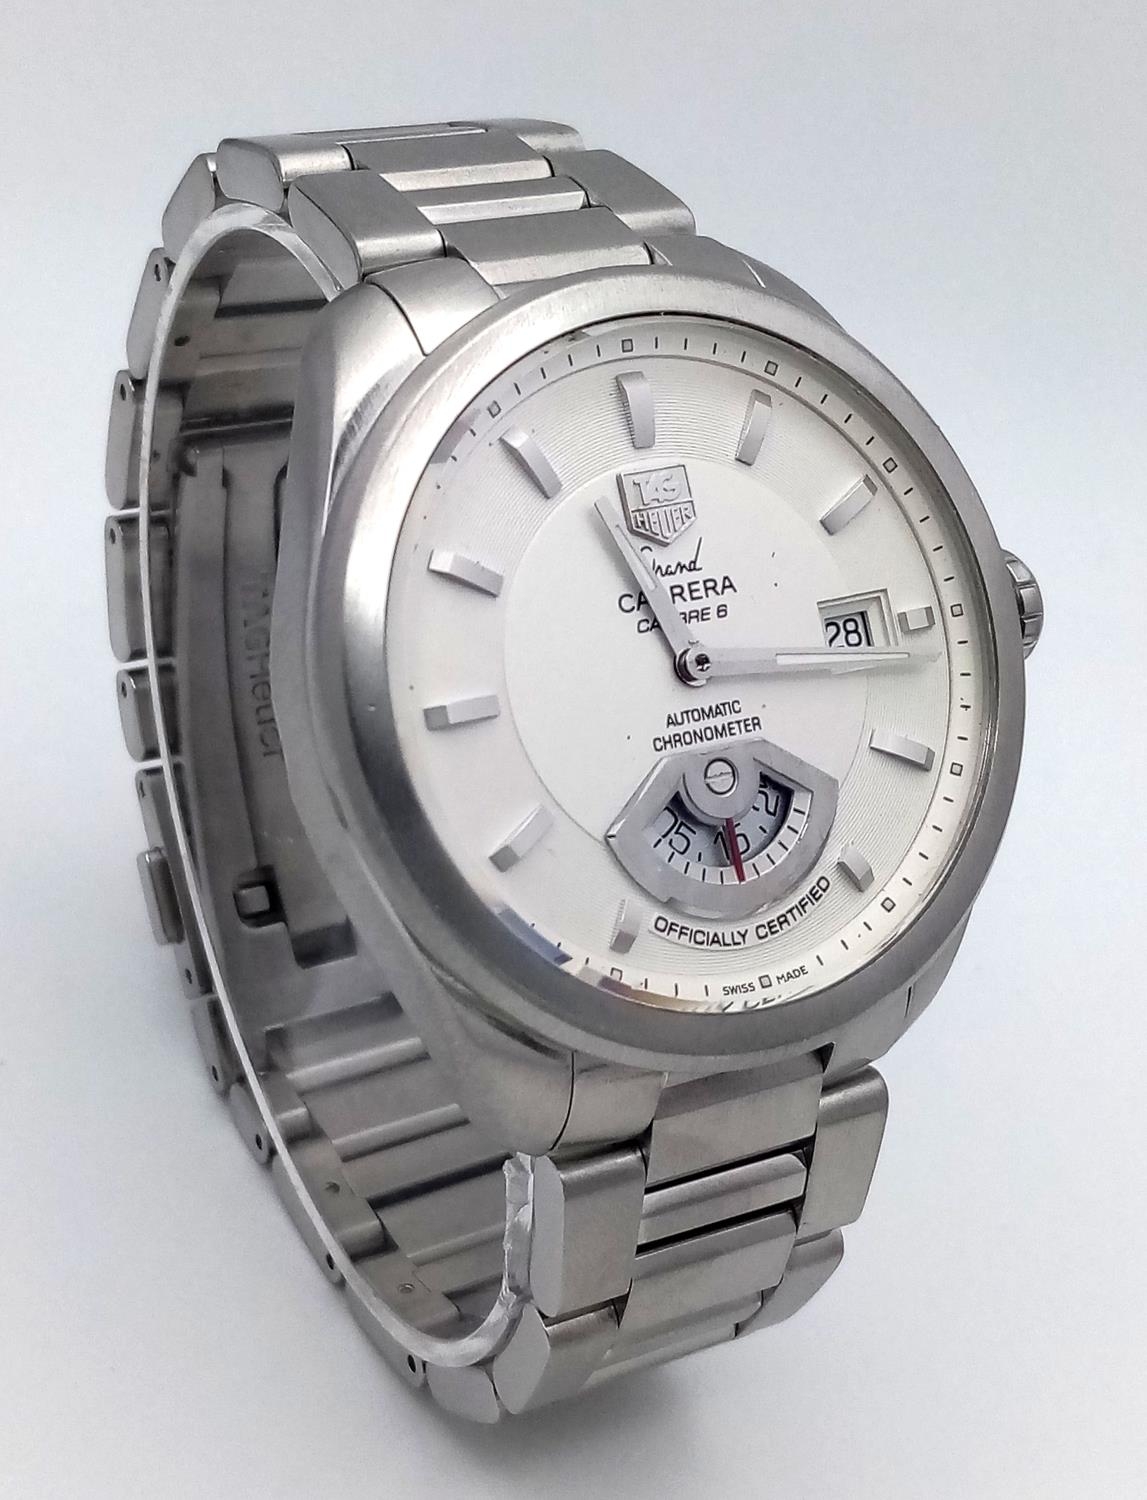 A Tag Heuer Grand Carrera Automatic Gents Watch. Stainless steel bracelet and case - 41mm. White